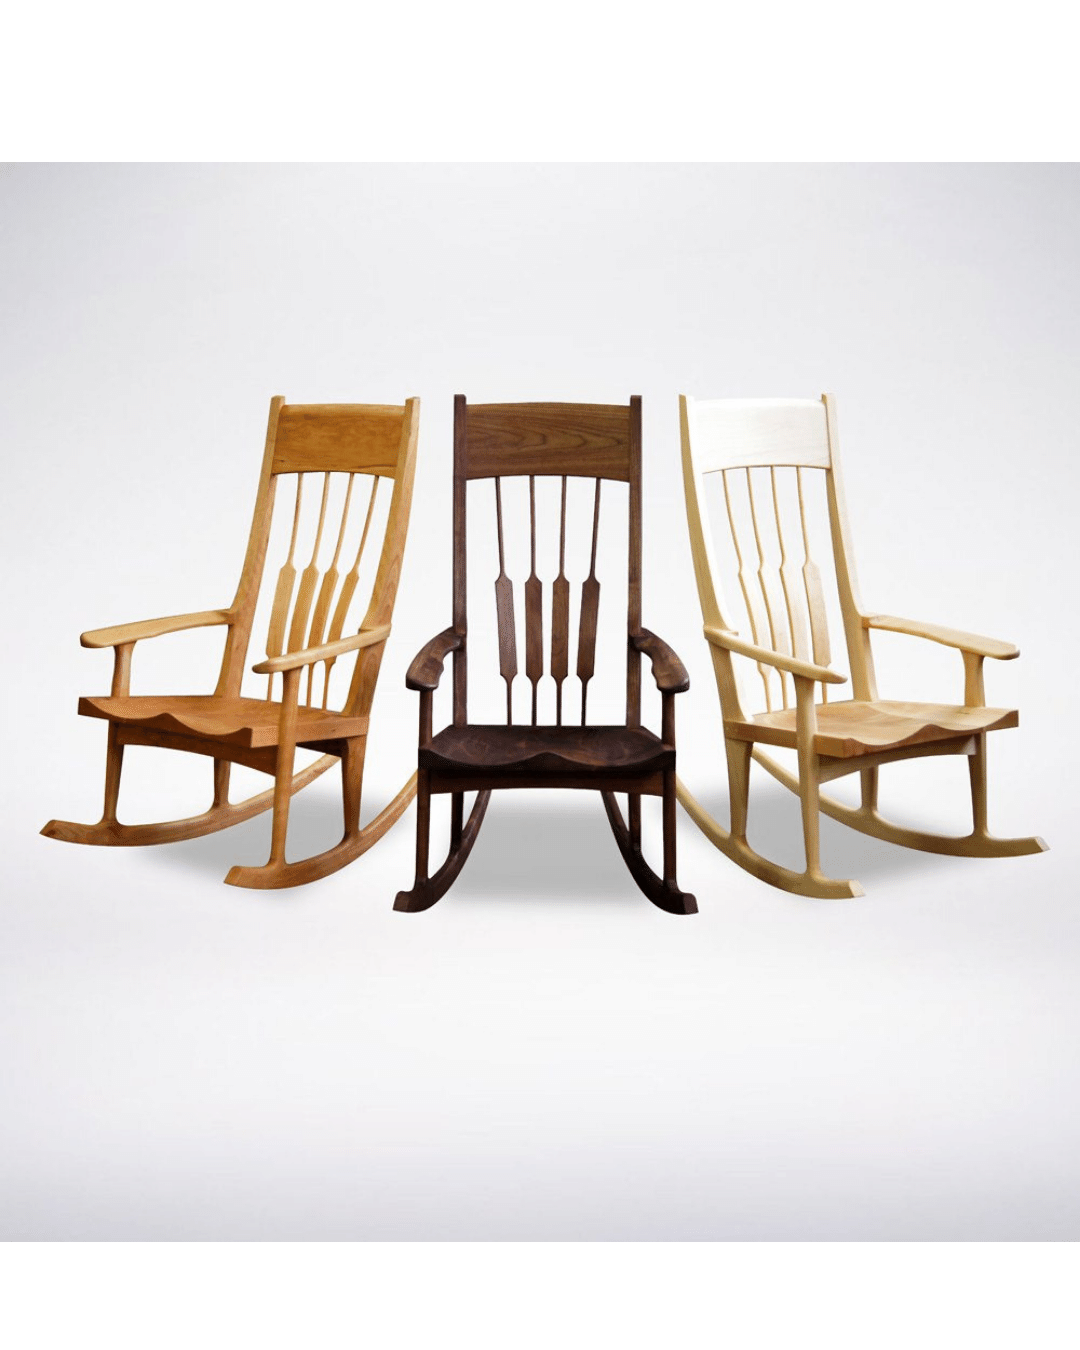 Sunrise Rocking Chair - Handcrafted Solid Wood Rocking Chair